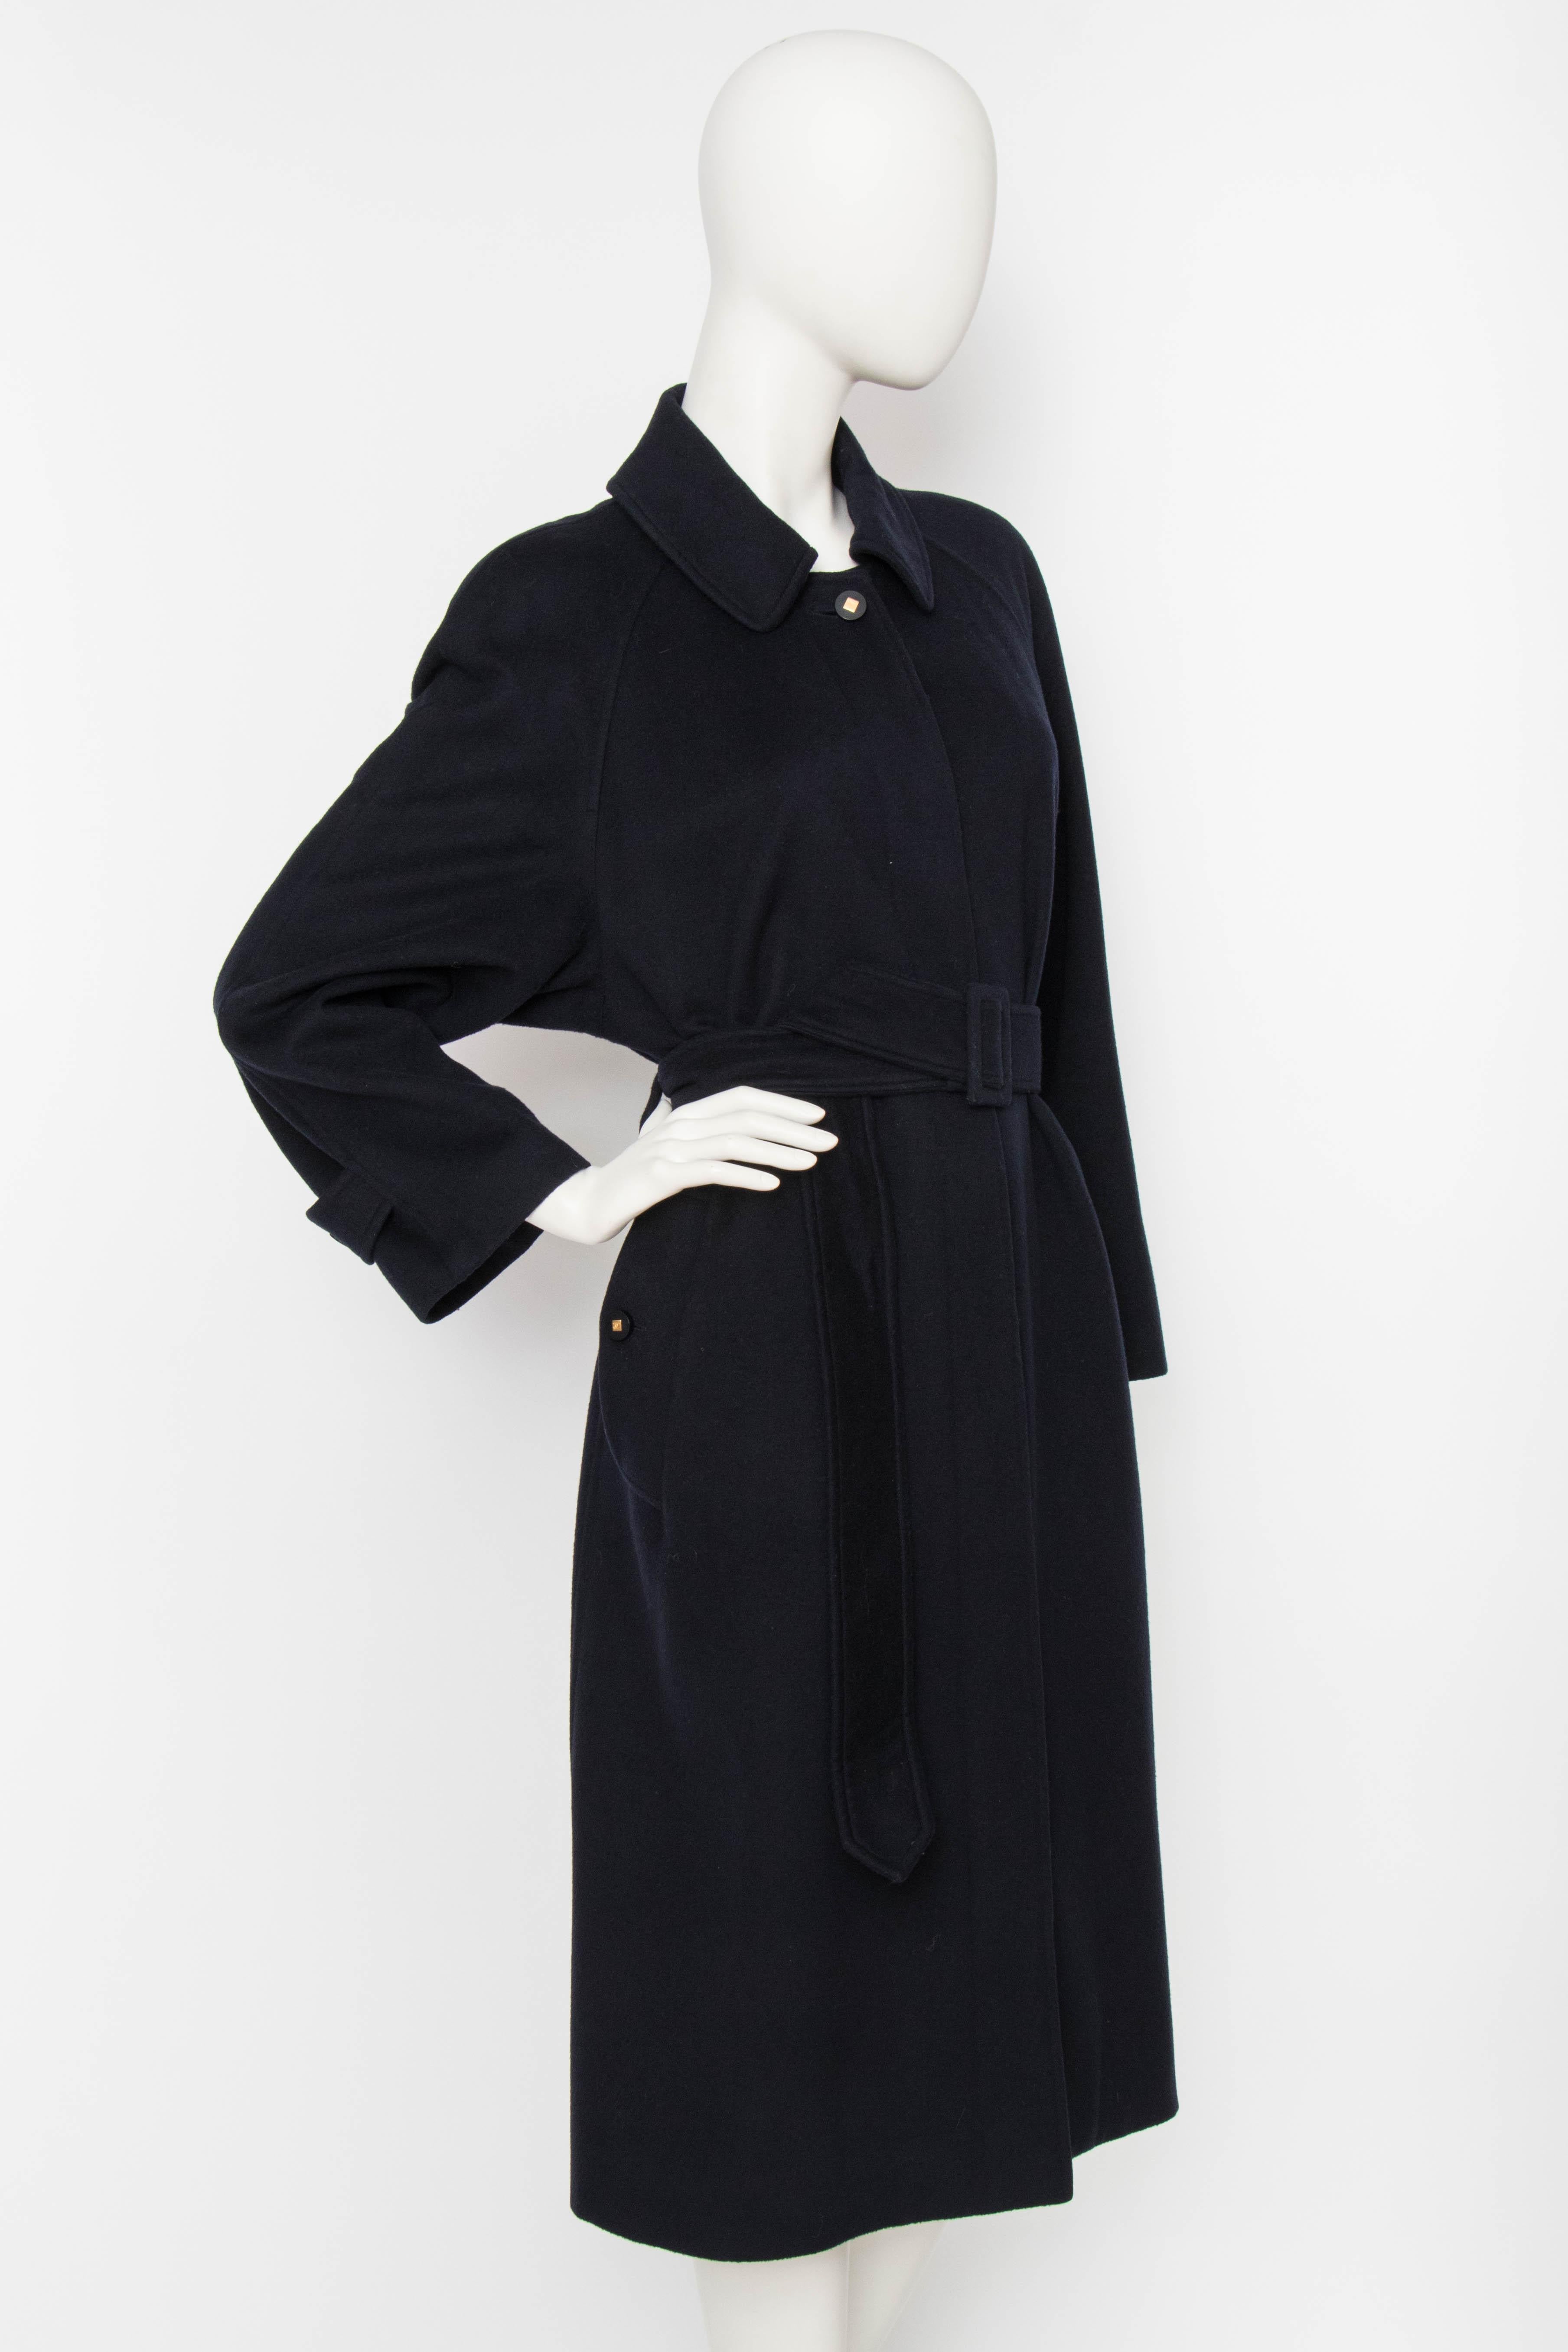 An incredible 1980s navy cashmere Chanel coat with a hidden front button closure, raglan sleeves and matching waistbelt. The coat is lined in navy silk. The top button and the buttons at the adjustable cuff is navy with a gold-toned center which is